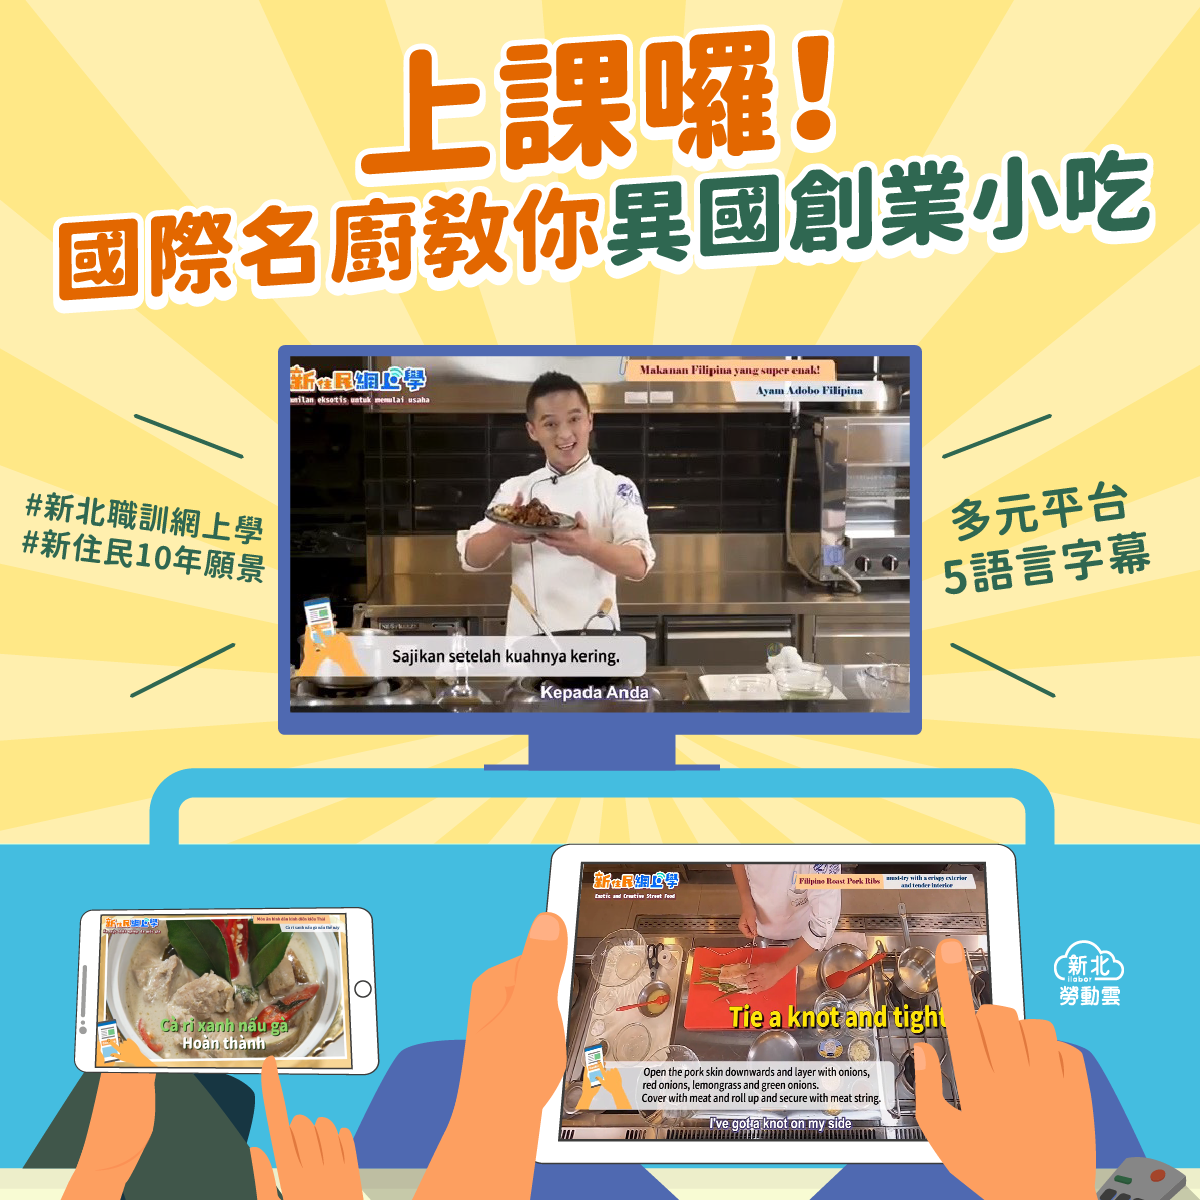 The course videos provide subtitles in 5 languages: Vietnamese, Indian, Thai, English and Chinese. (Photo / Provided by the Labor Affairs Bureau)